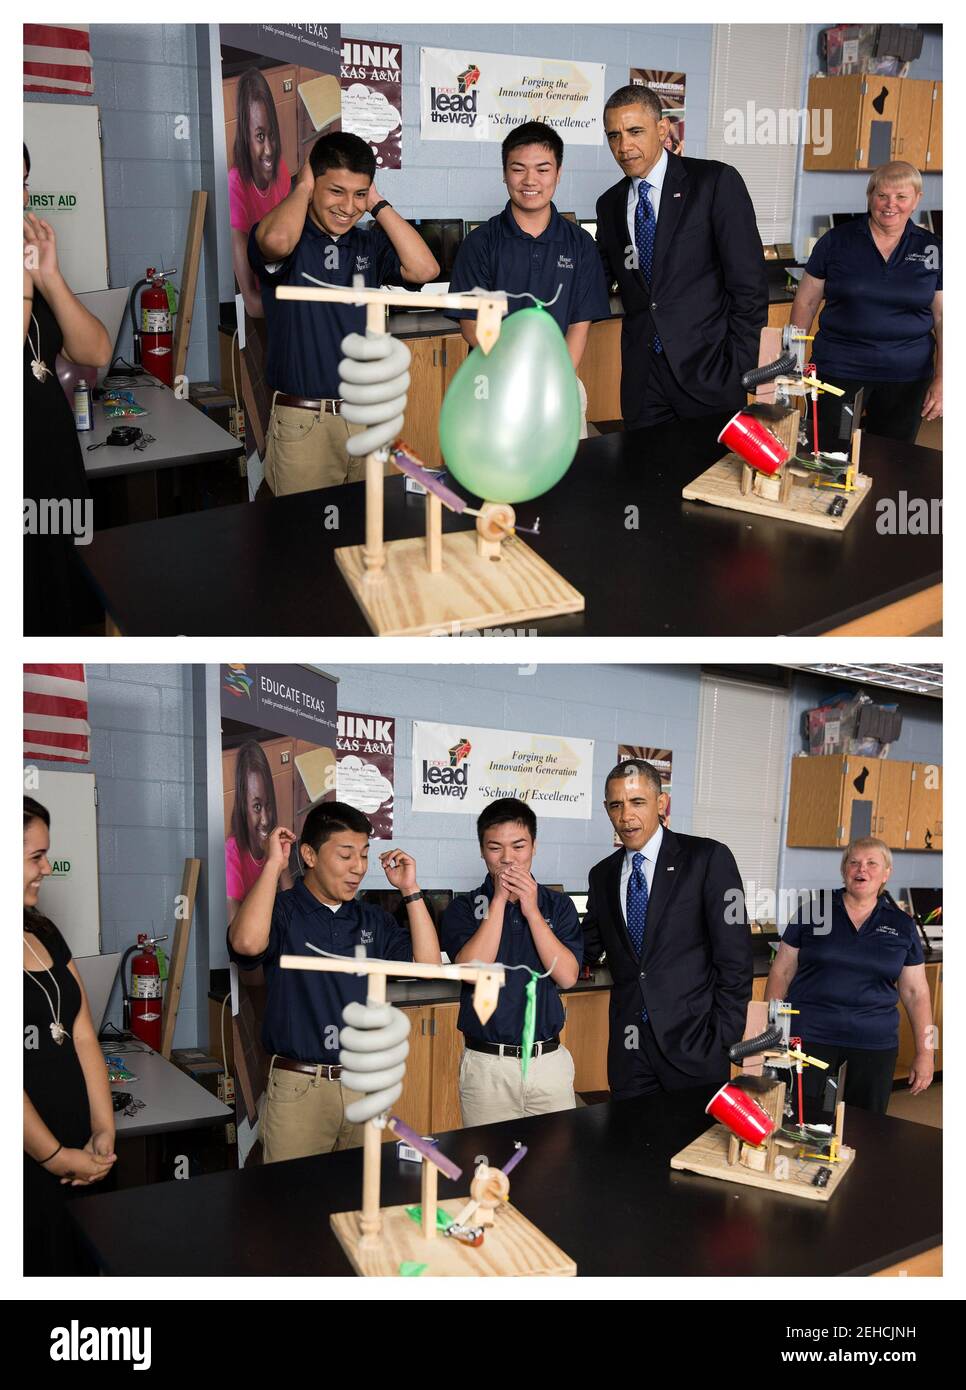 President Barack Obama watches a demonstration by Oscar Perez and Bobford Do as he tours a classroom at Manor New Technology High School in Manor, Texas, May 9, 2013. Stock Photo